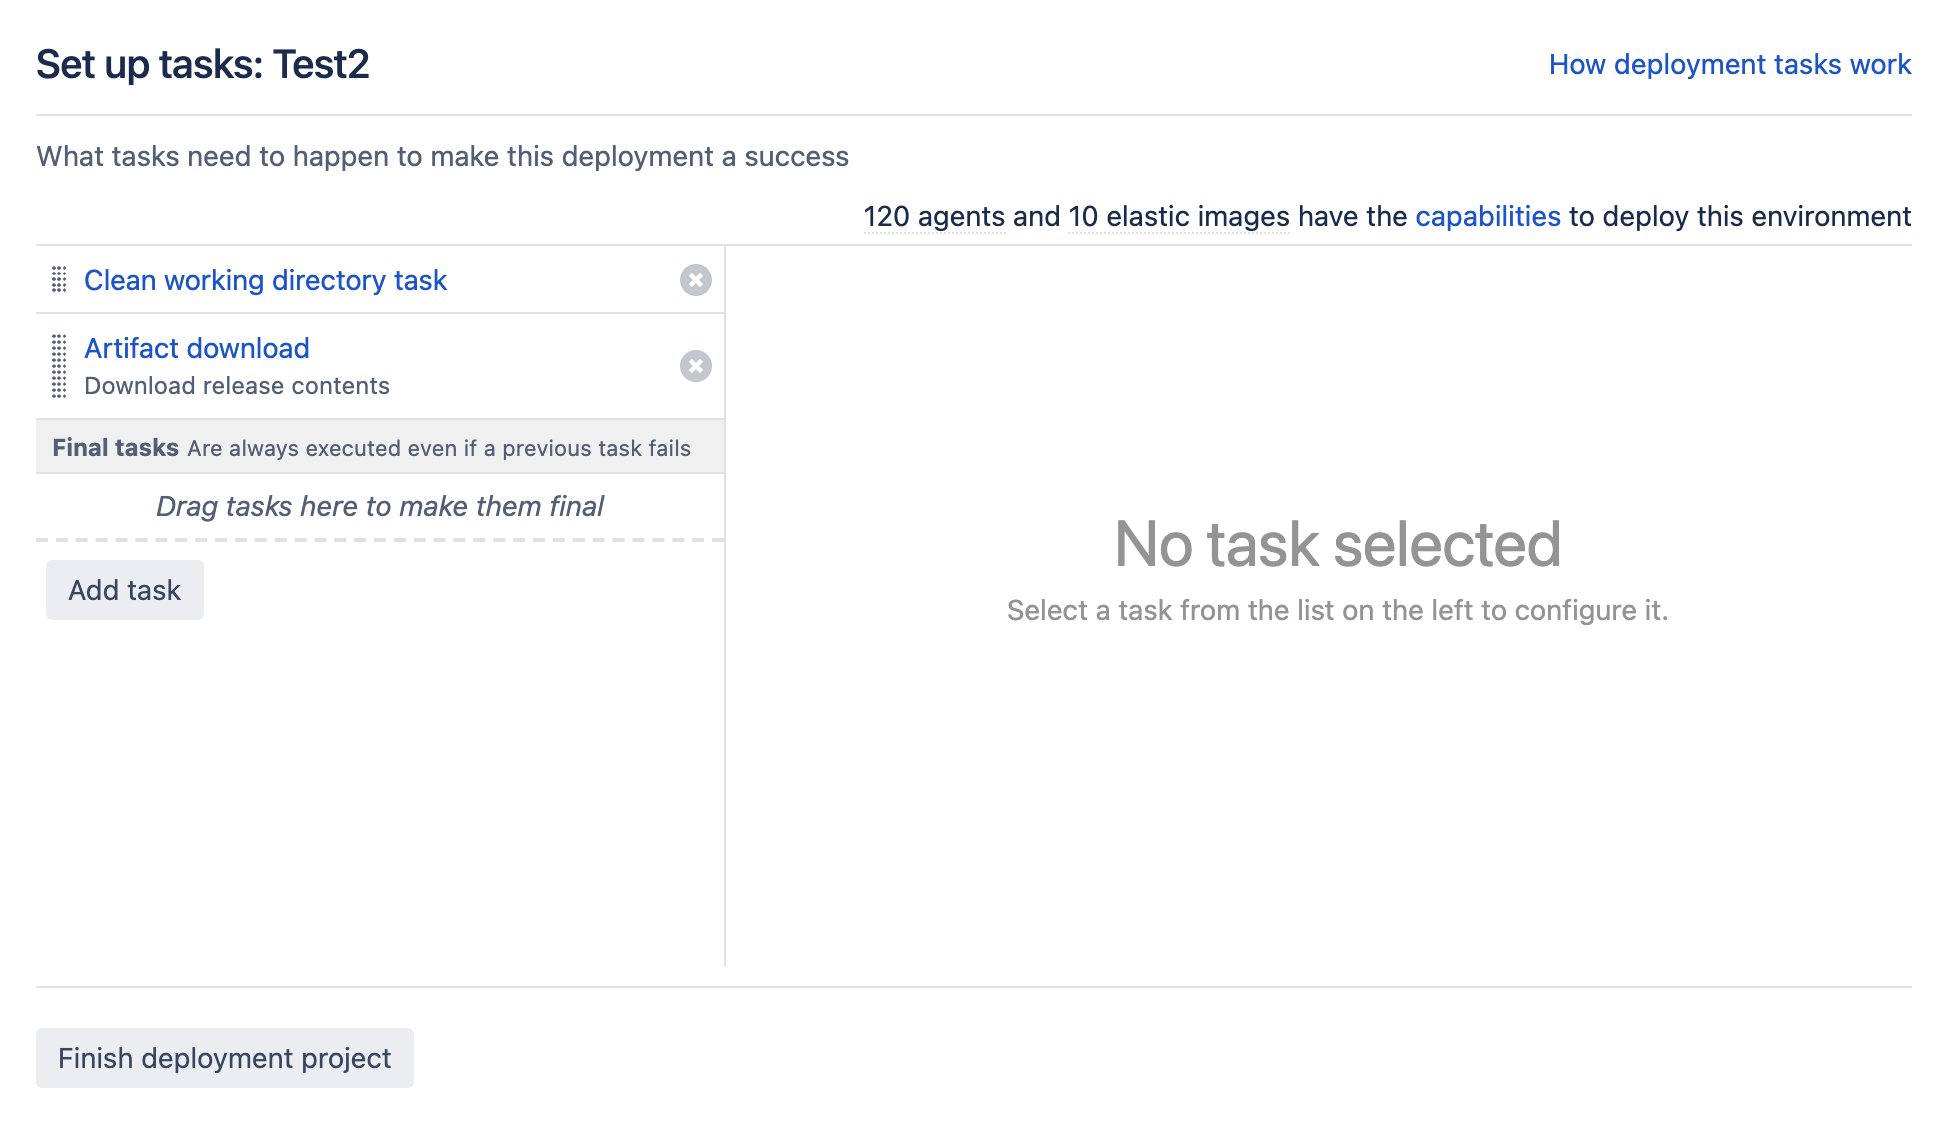 Task setup screen in deployment project environment